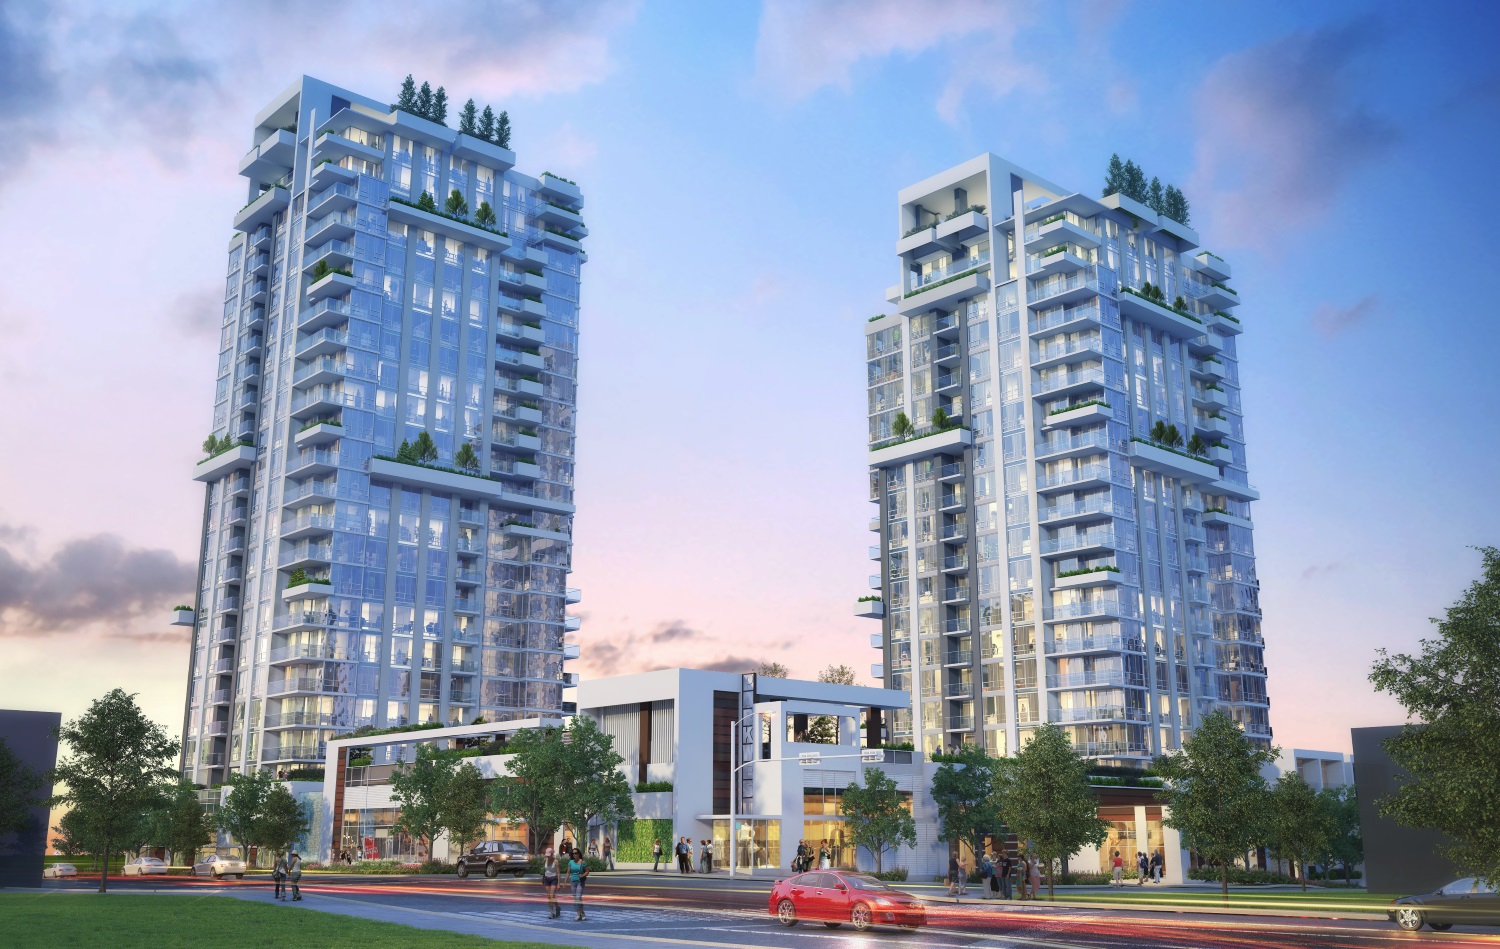 Park West at Lions Gate - New Condo Development In North Vancouver